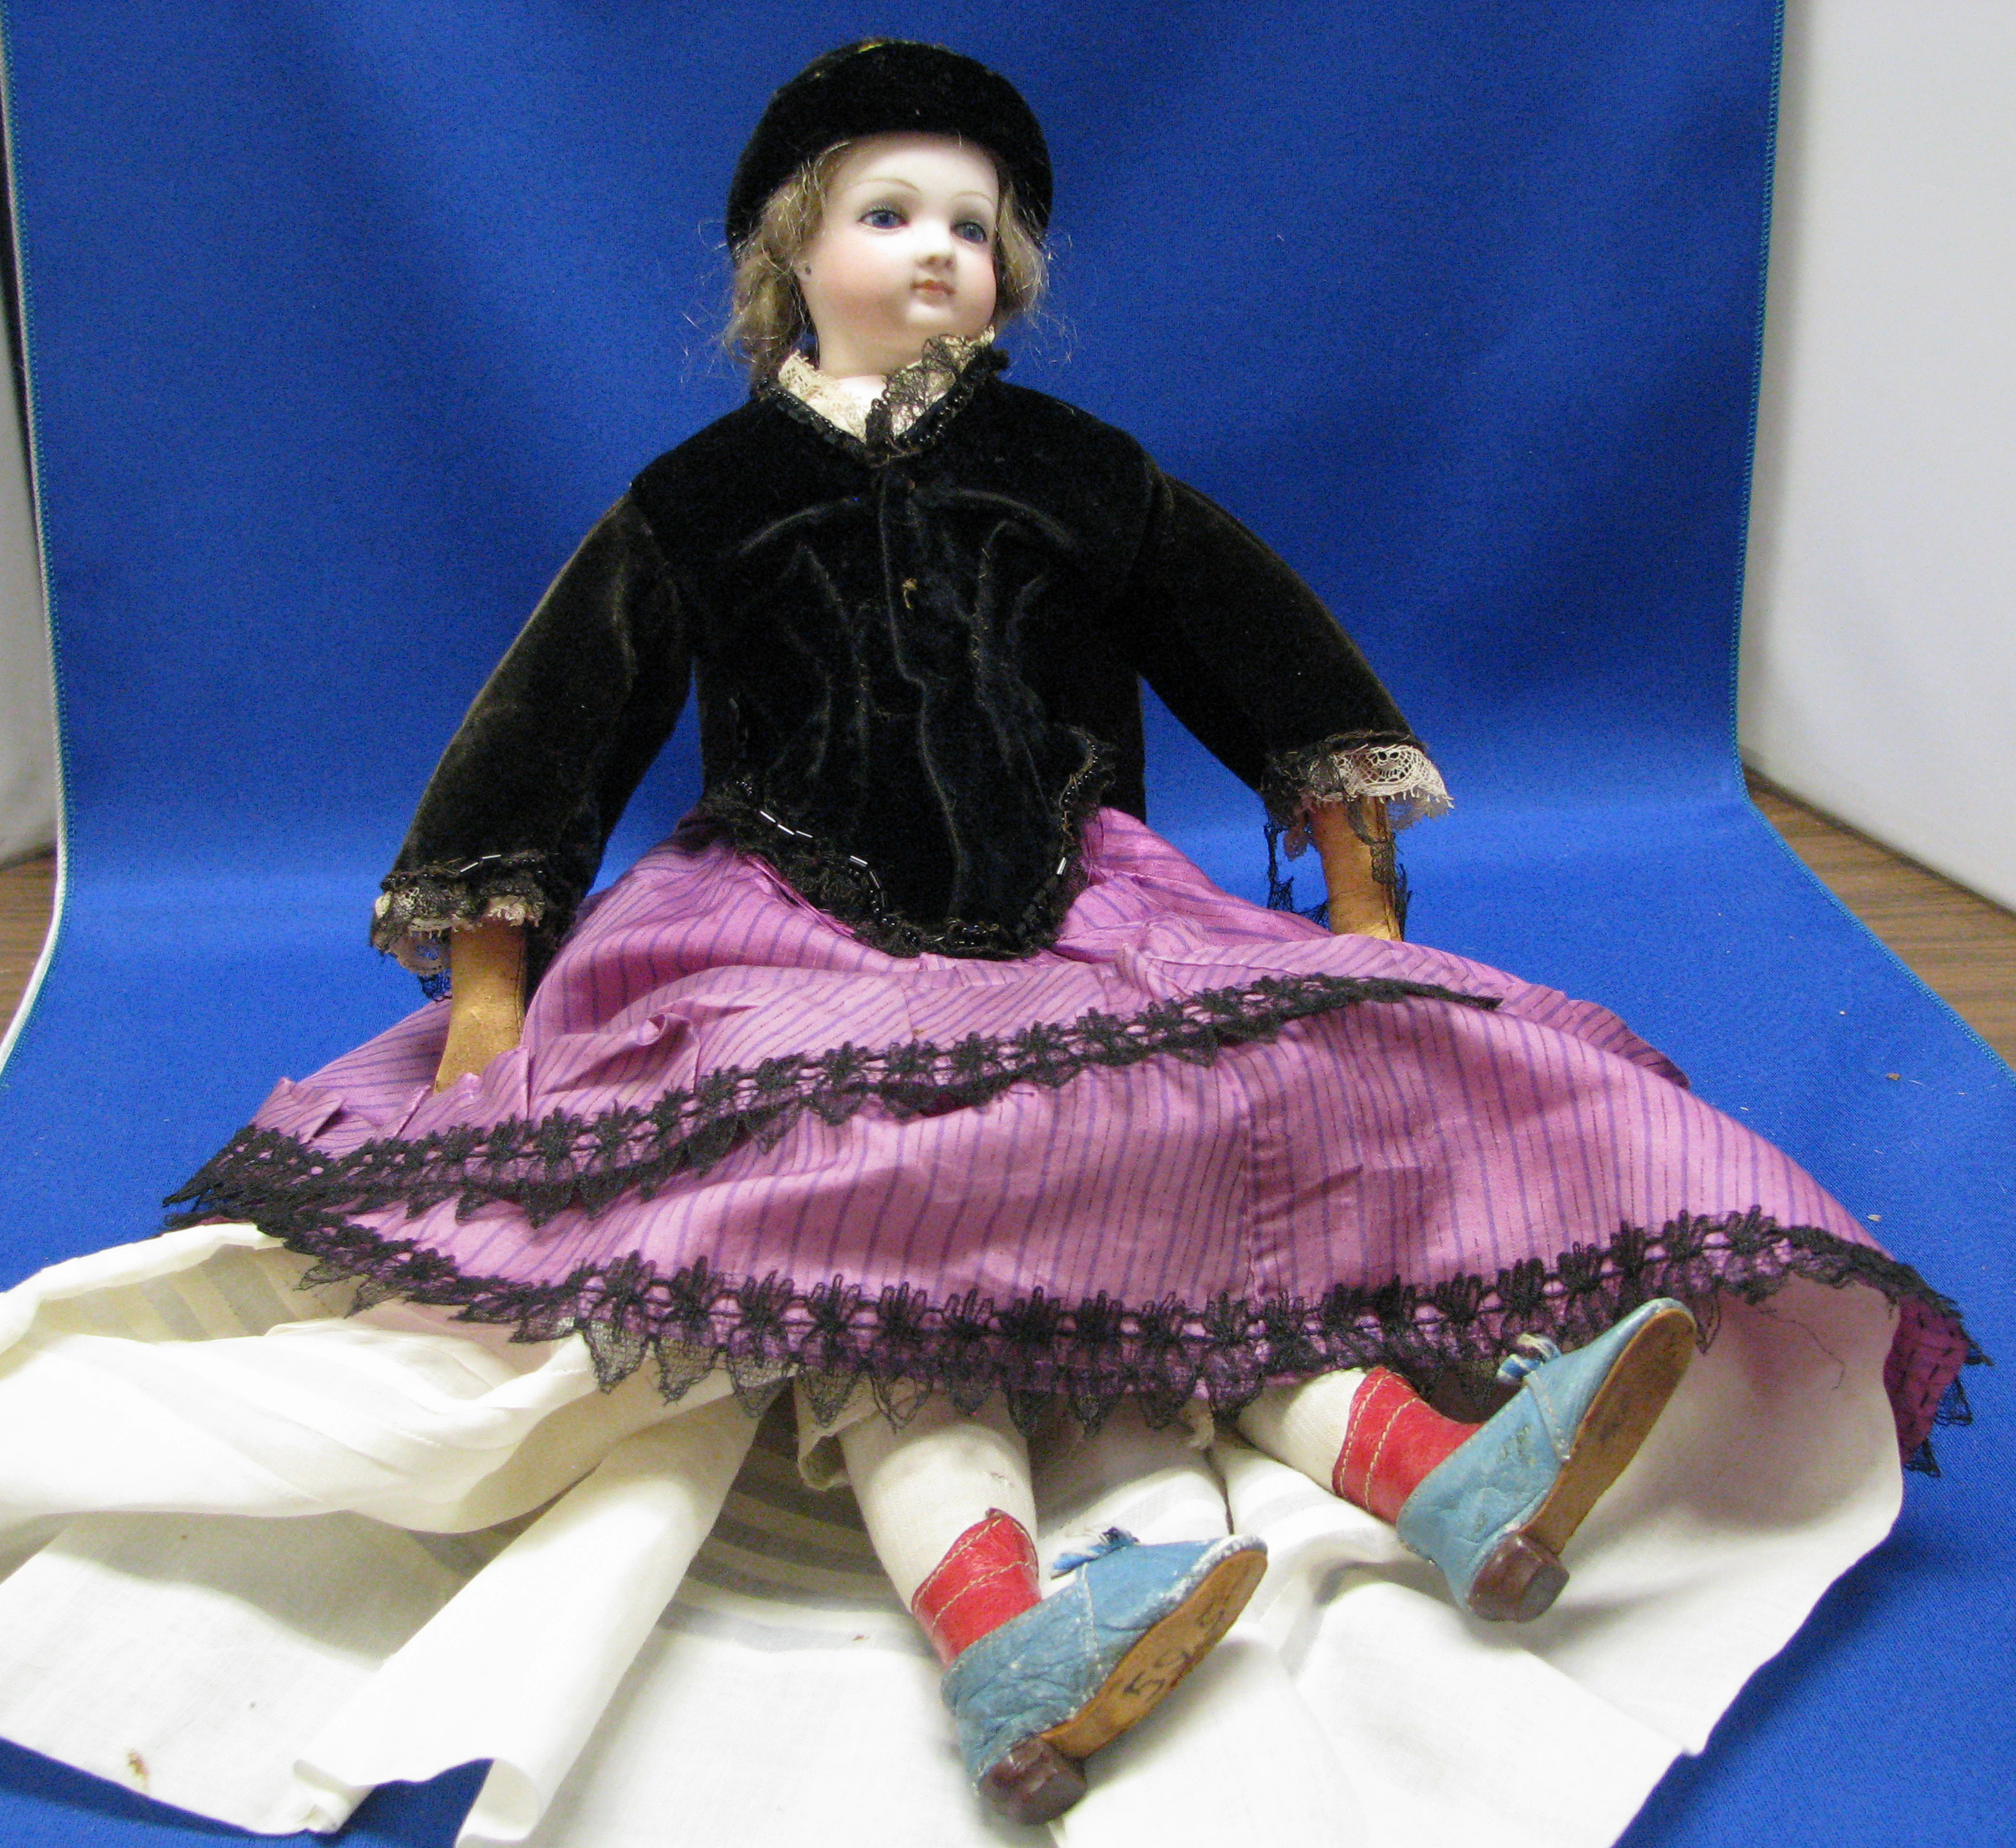 a%20toy%20cotton%20doll%20with%20blond%20hair%2C%20black%20sweather%20and%20purple%20skirt